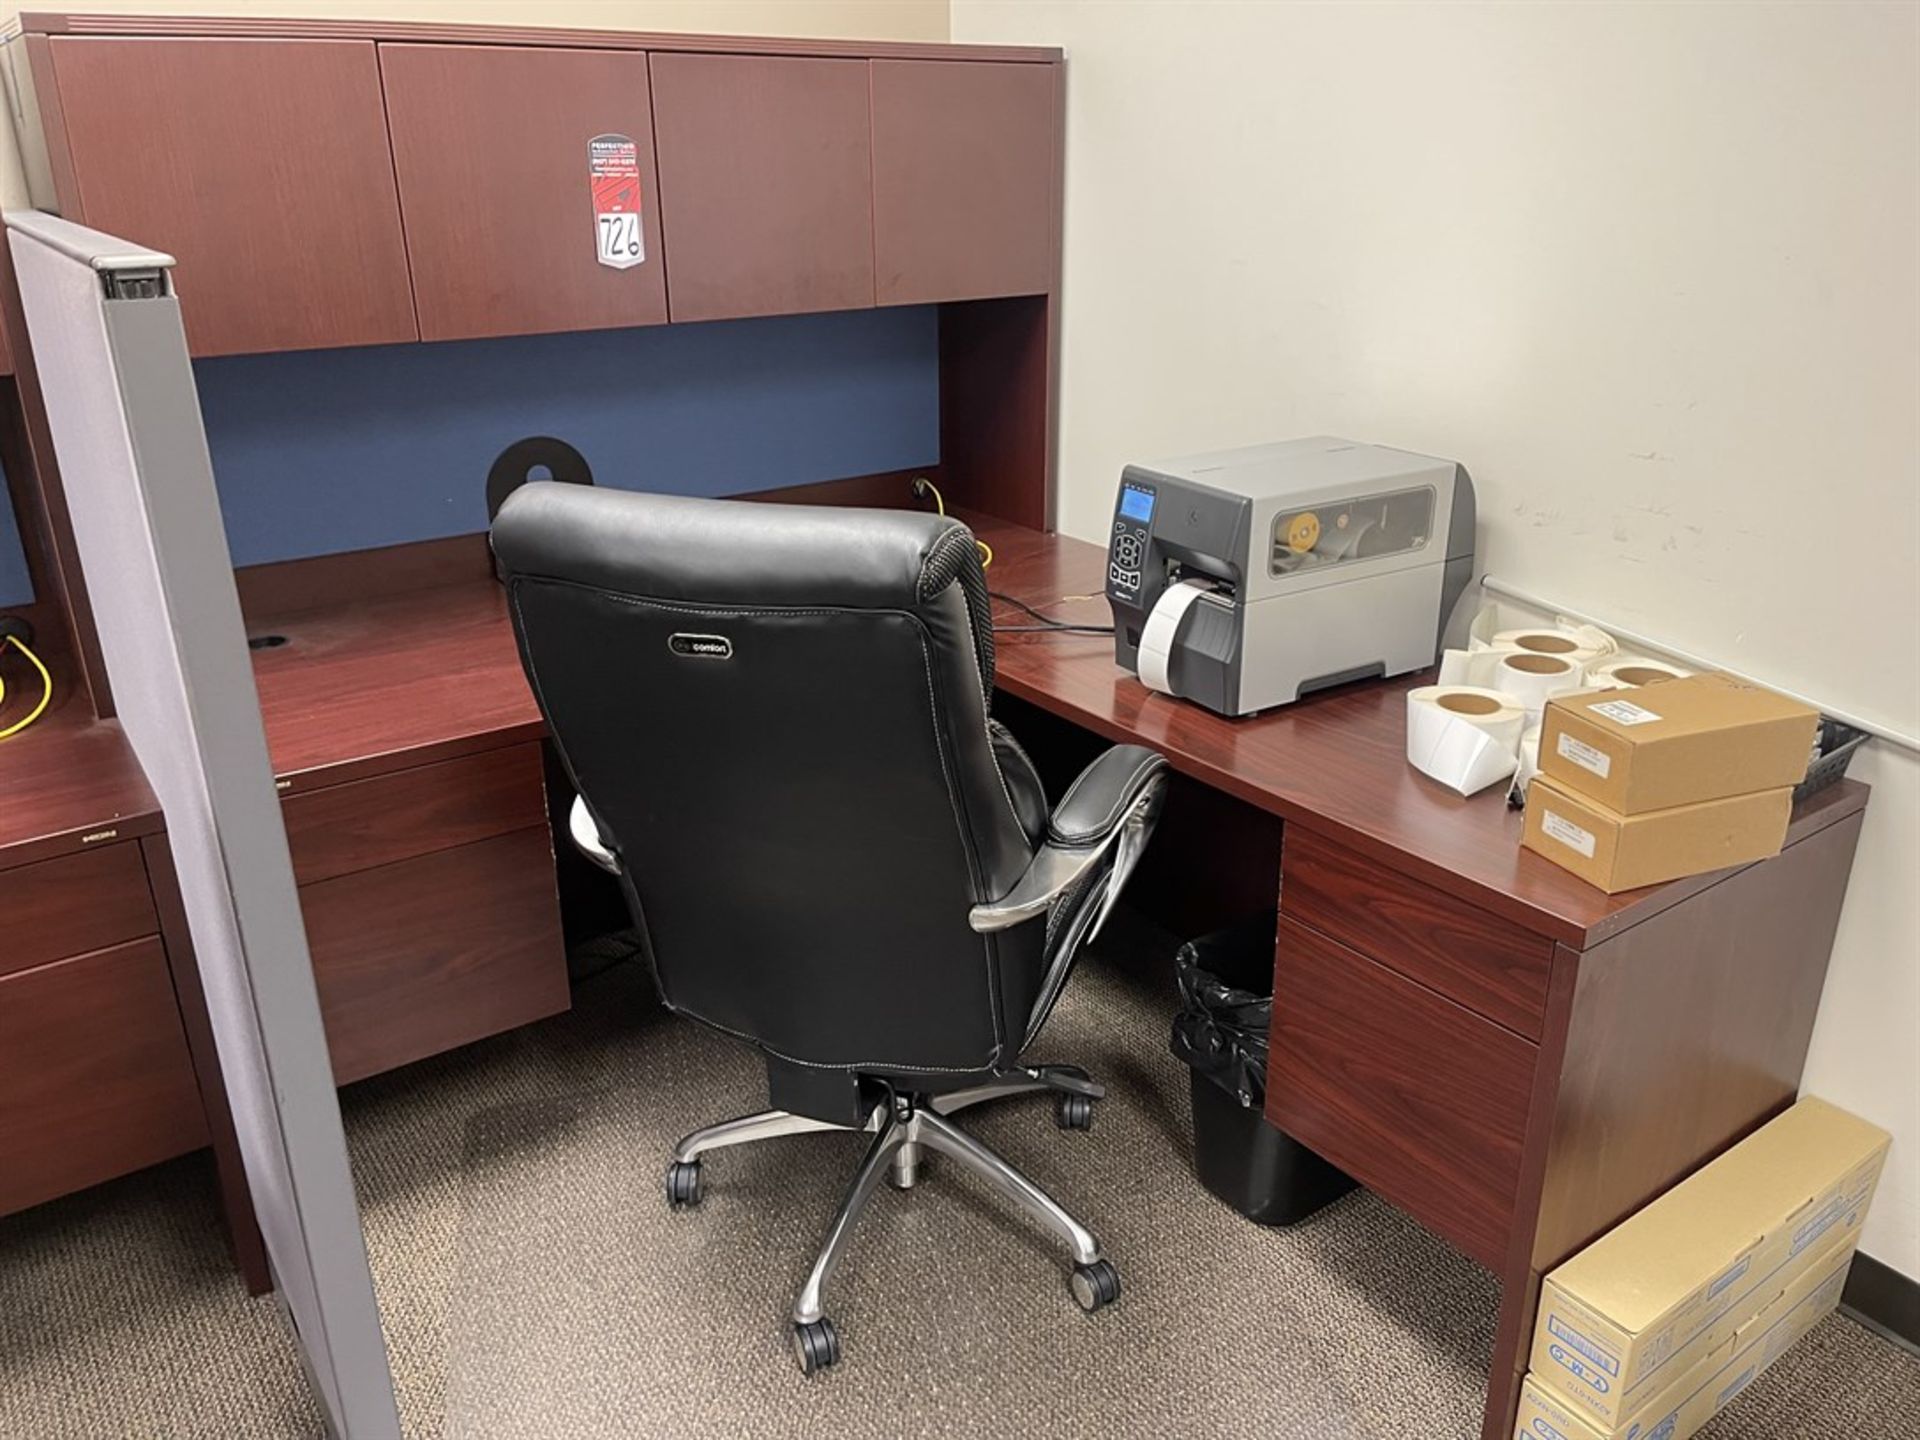 L-Shaped Desk and Office Chair, (No Contents or Electronics)